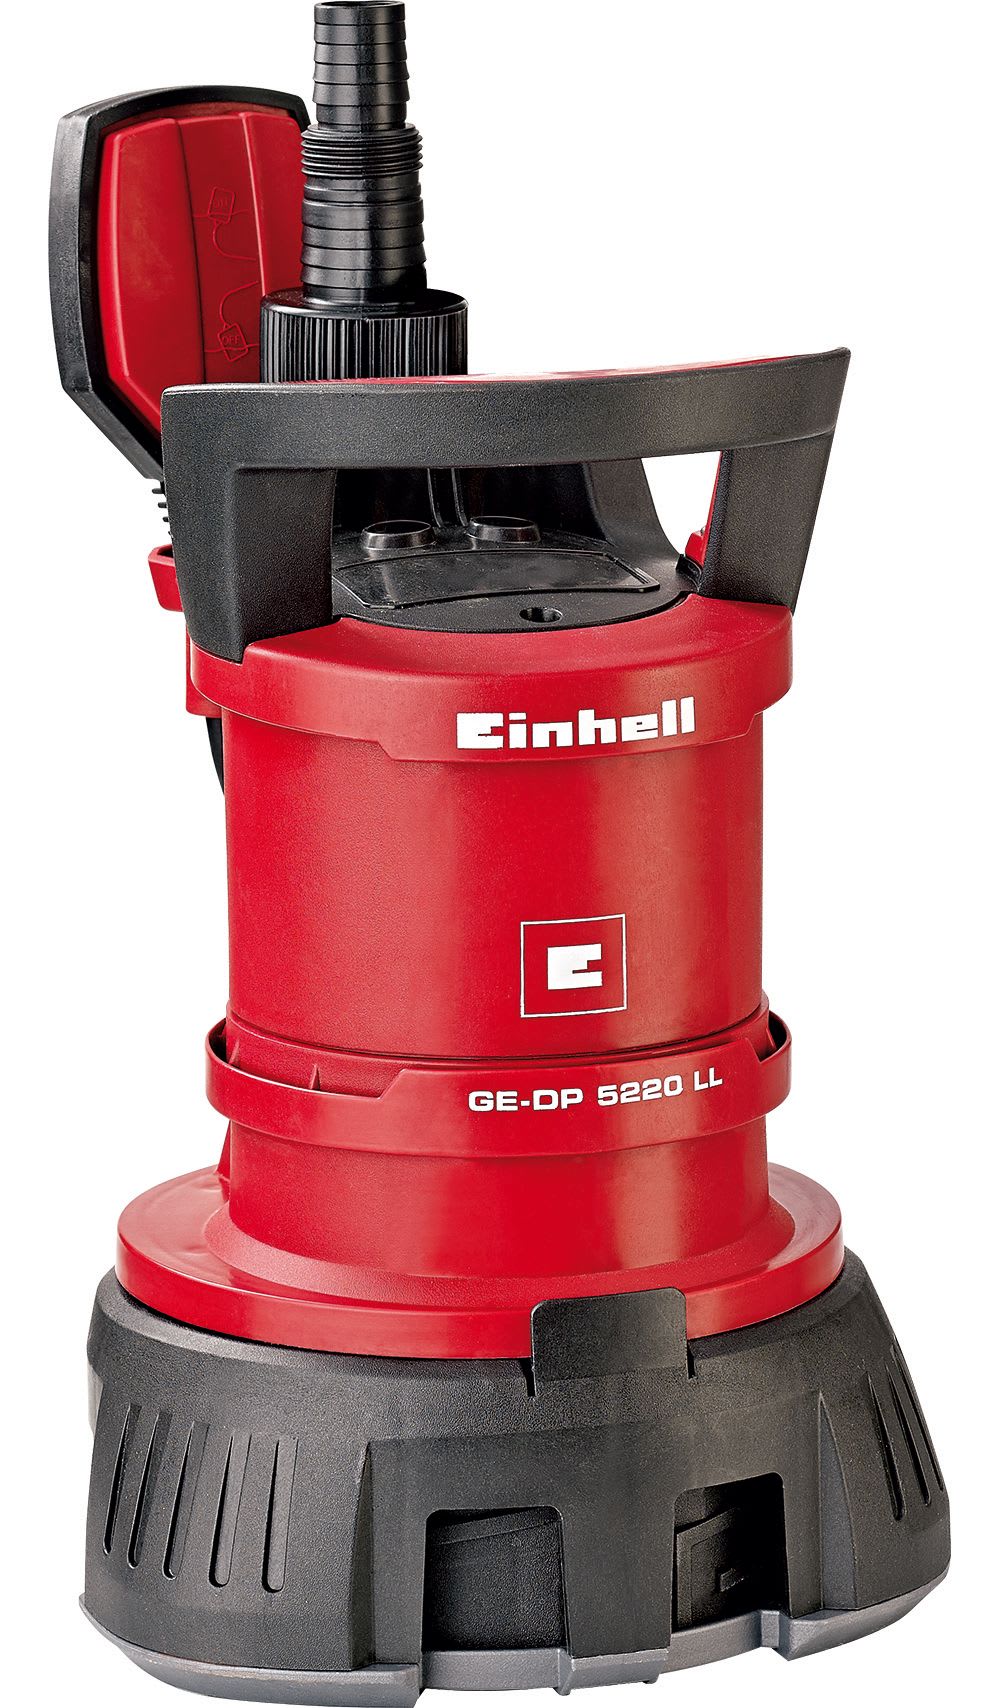 Einhell GE-DP 5220 LL ECO Electric Submersible Combination